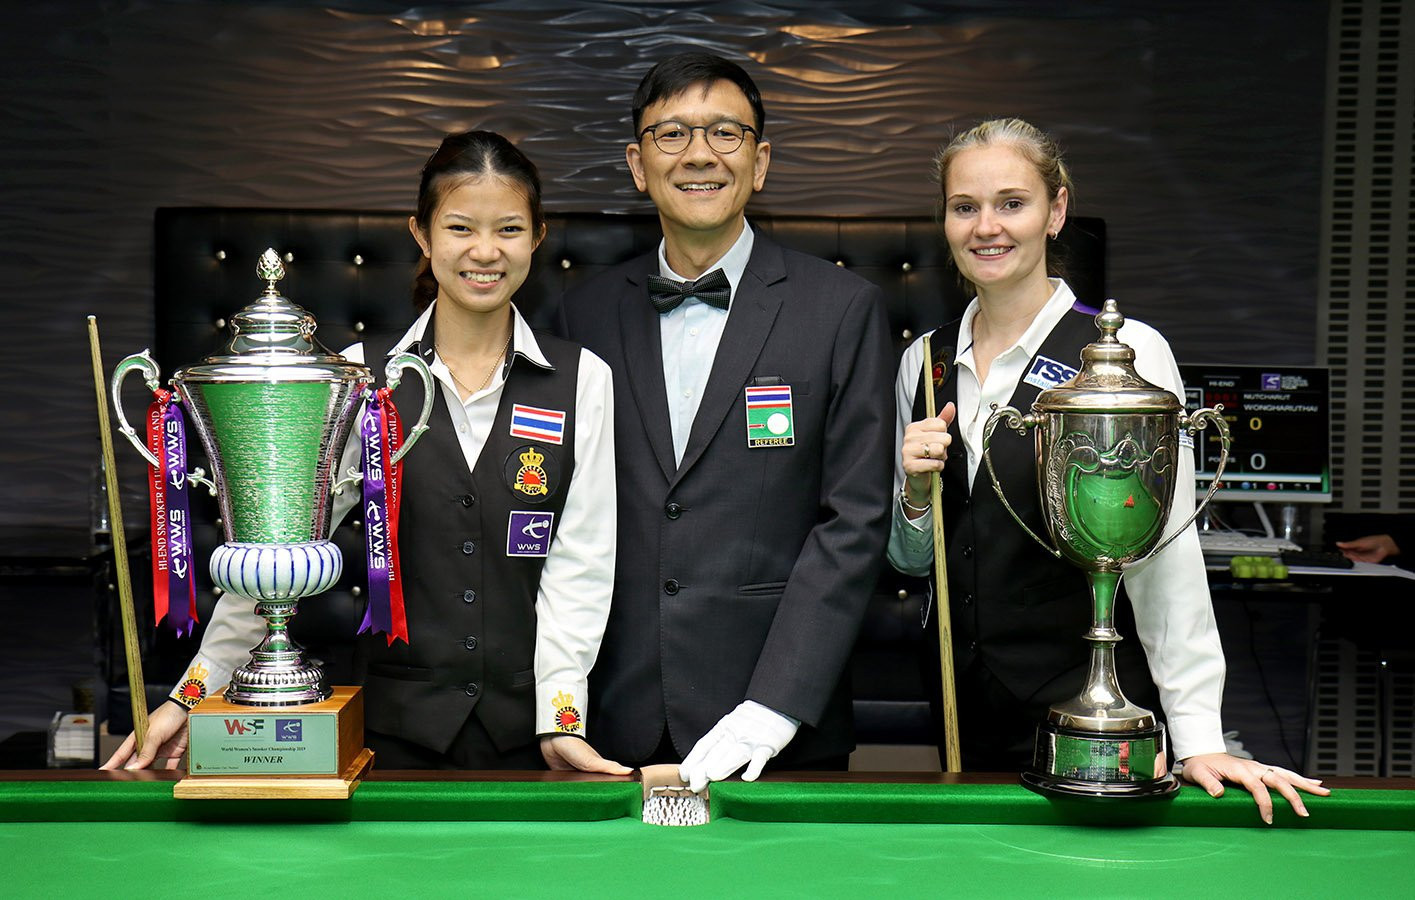 Evans wins record 12th World Womens Snooker Championship after seeing off challenge of Wongharuthai